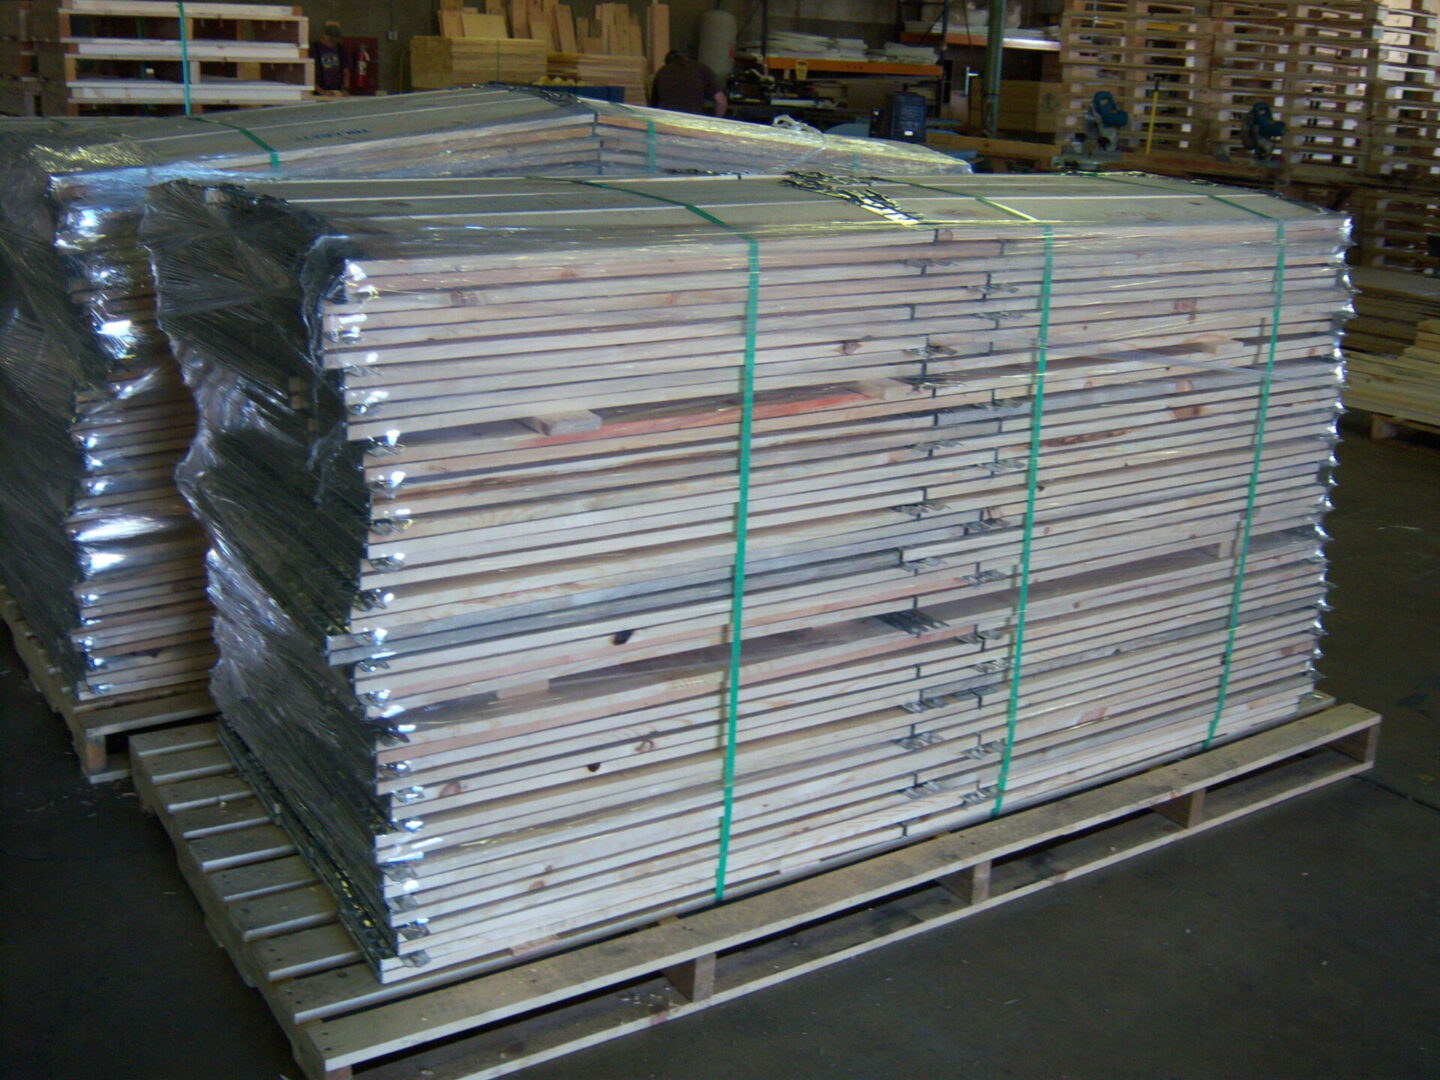 A pallet of wooden planks stacked on top of each other.